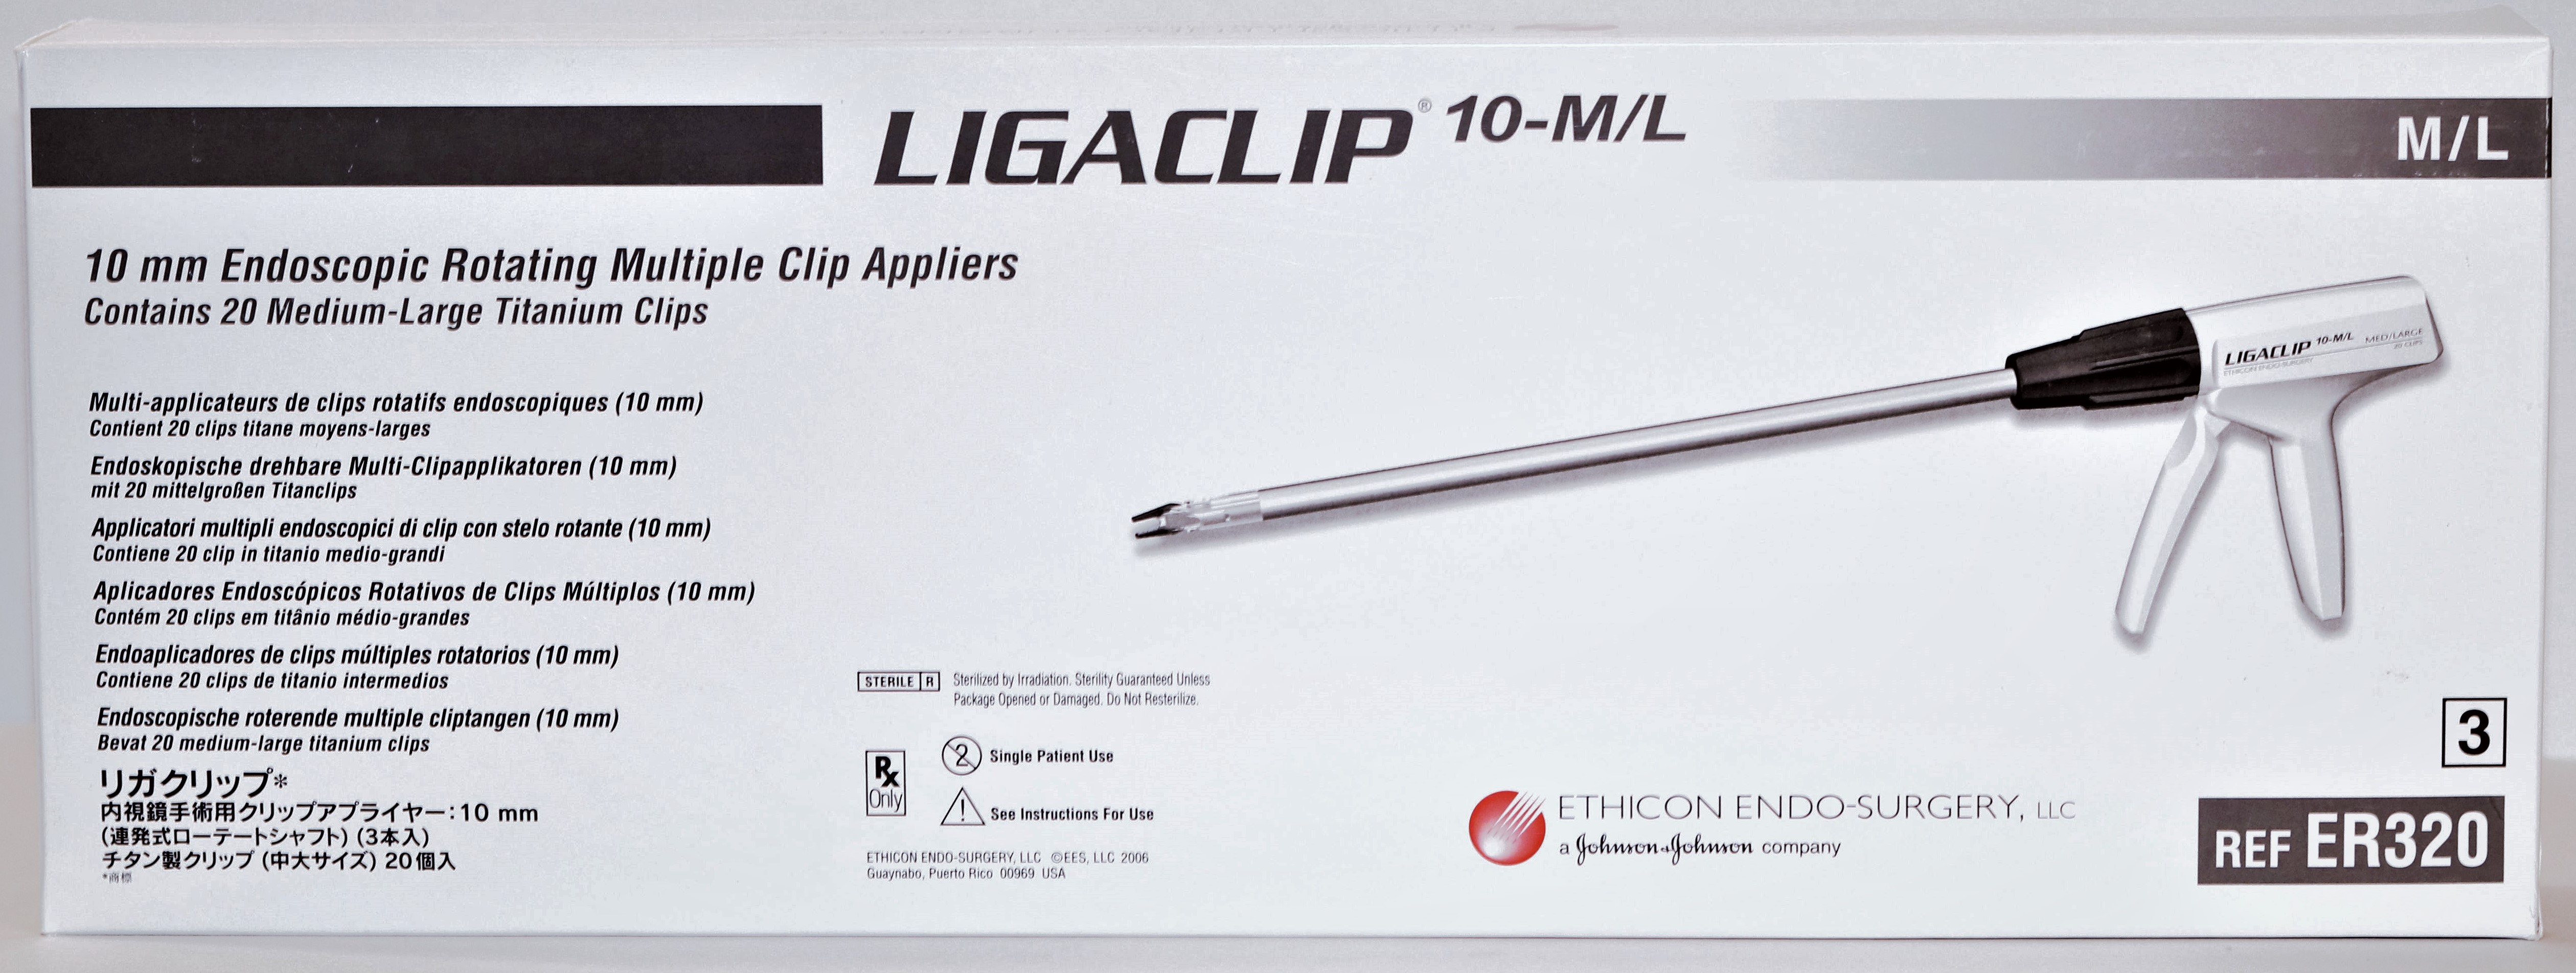 ETHICON ER320 -  LIGACLIP® Endoscopic Rotating Multiple Clip Applier with 20 M/L TI CLIPS 10MM